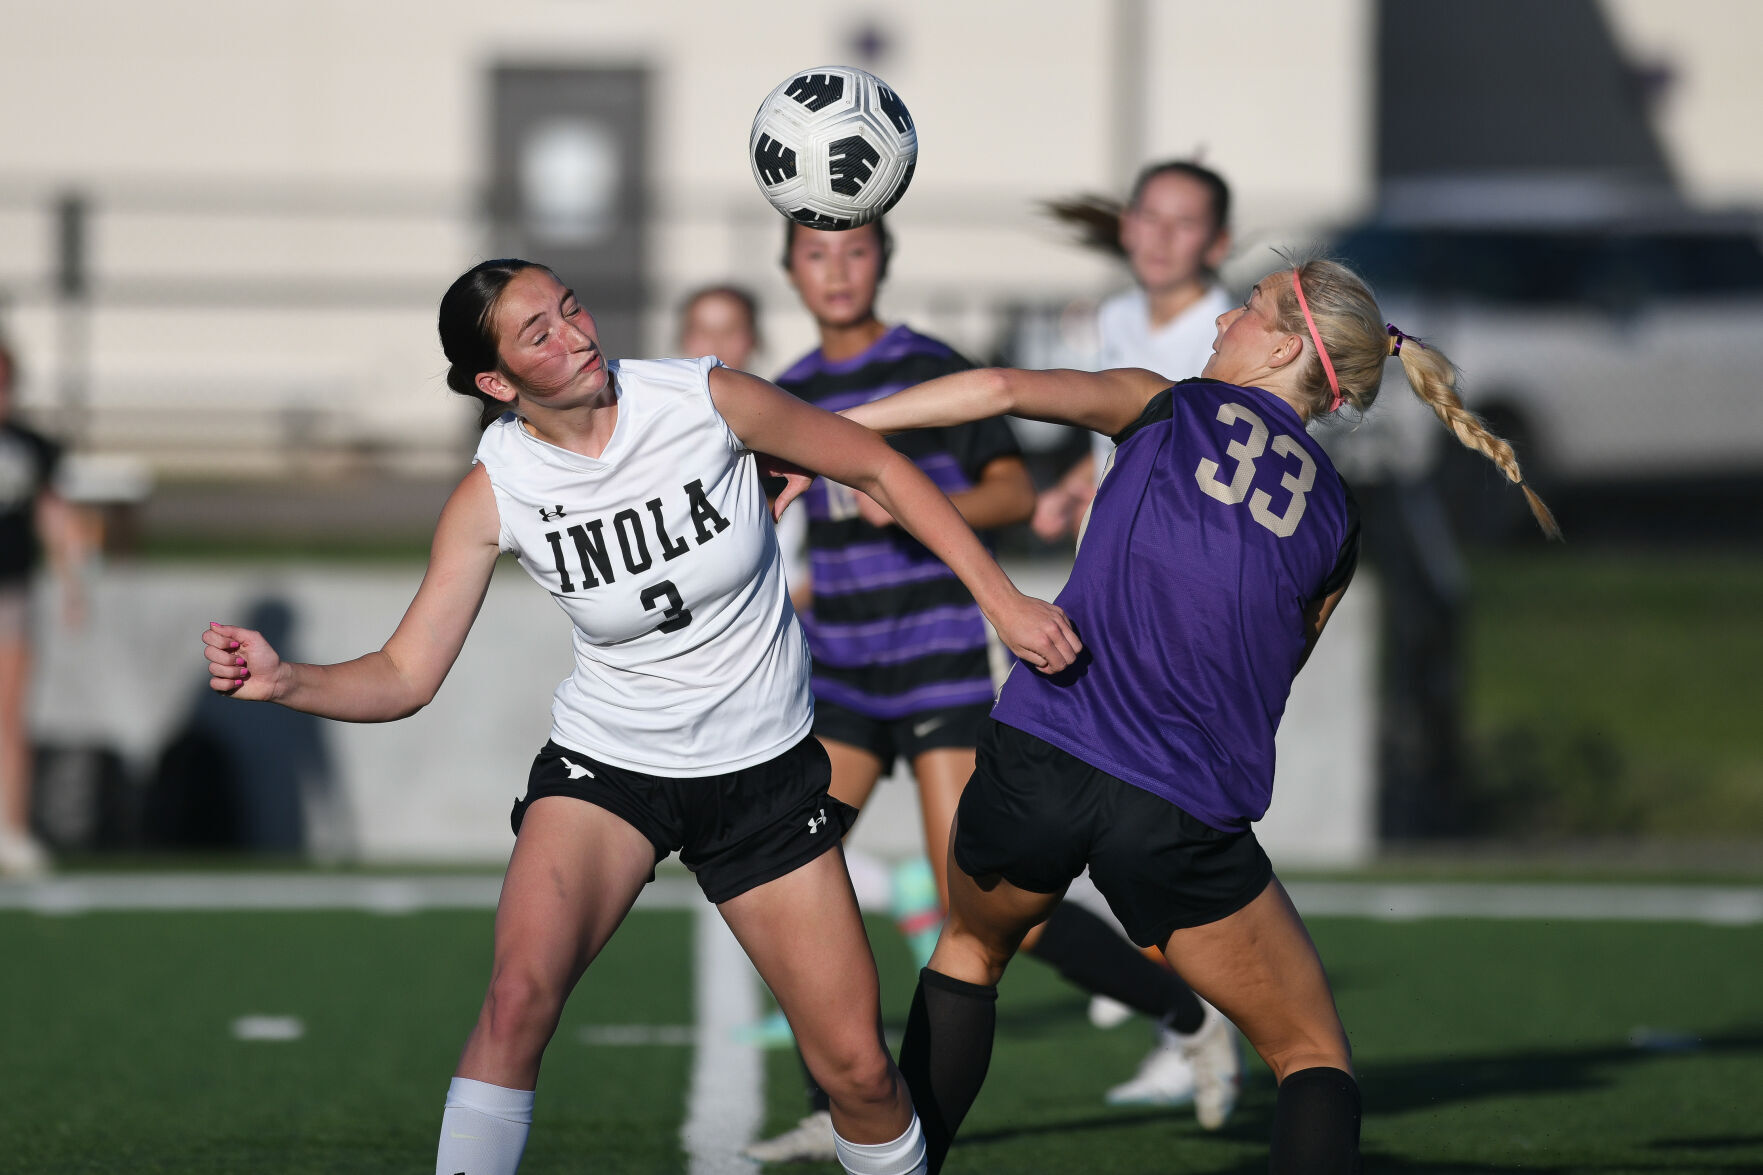 GIRLS SOCCER: Inola’s historic season ends in Class 3A semifinals